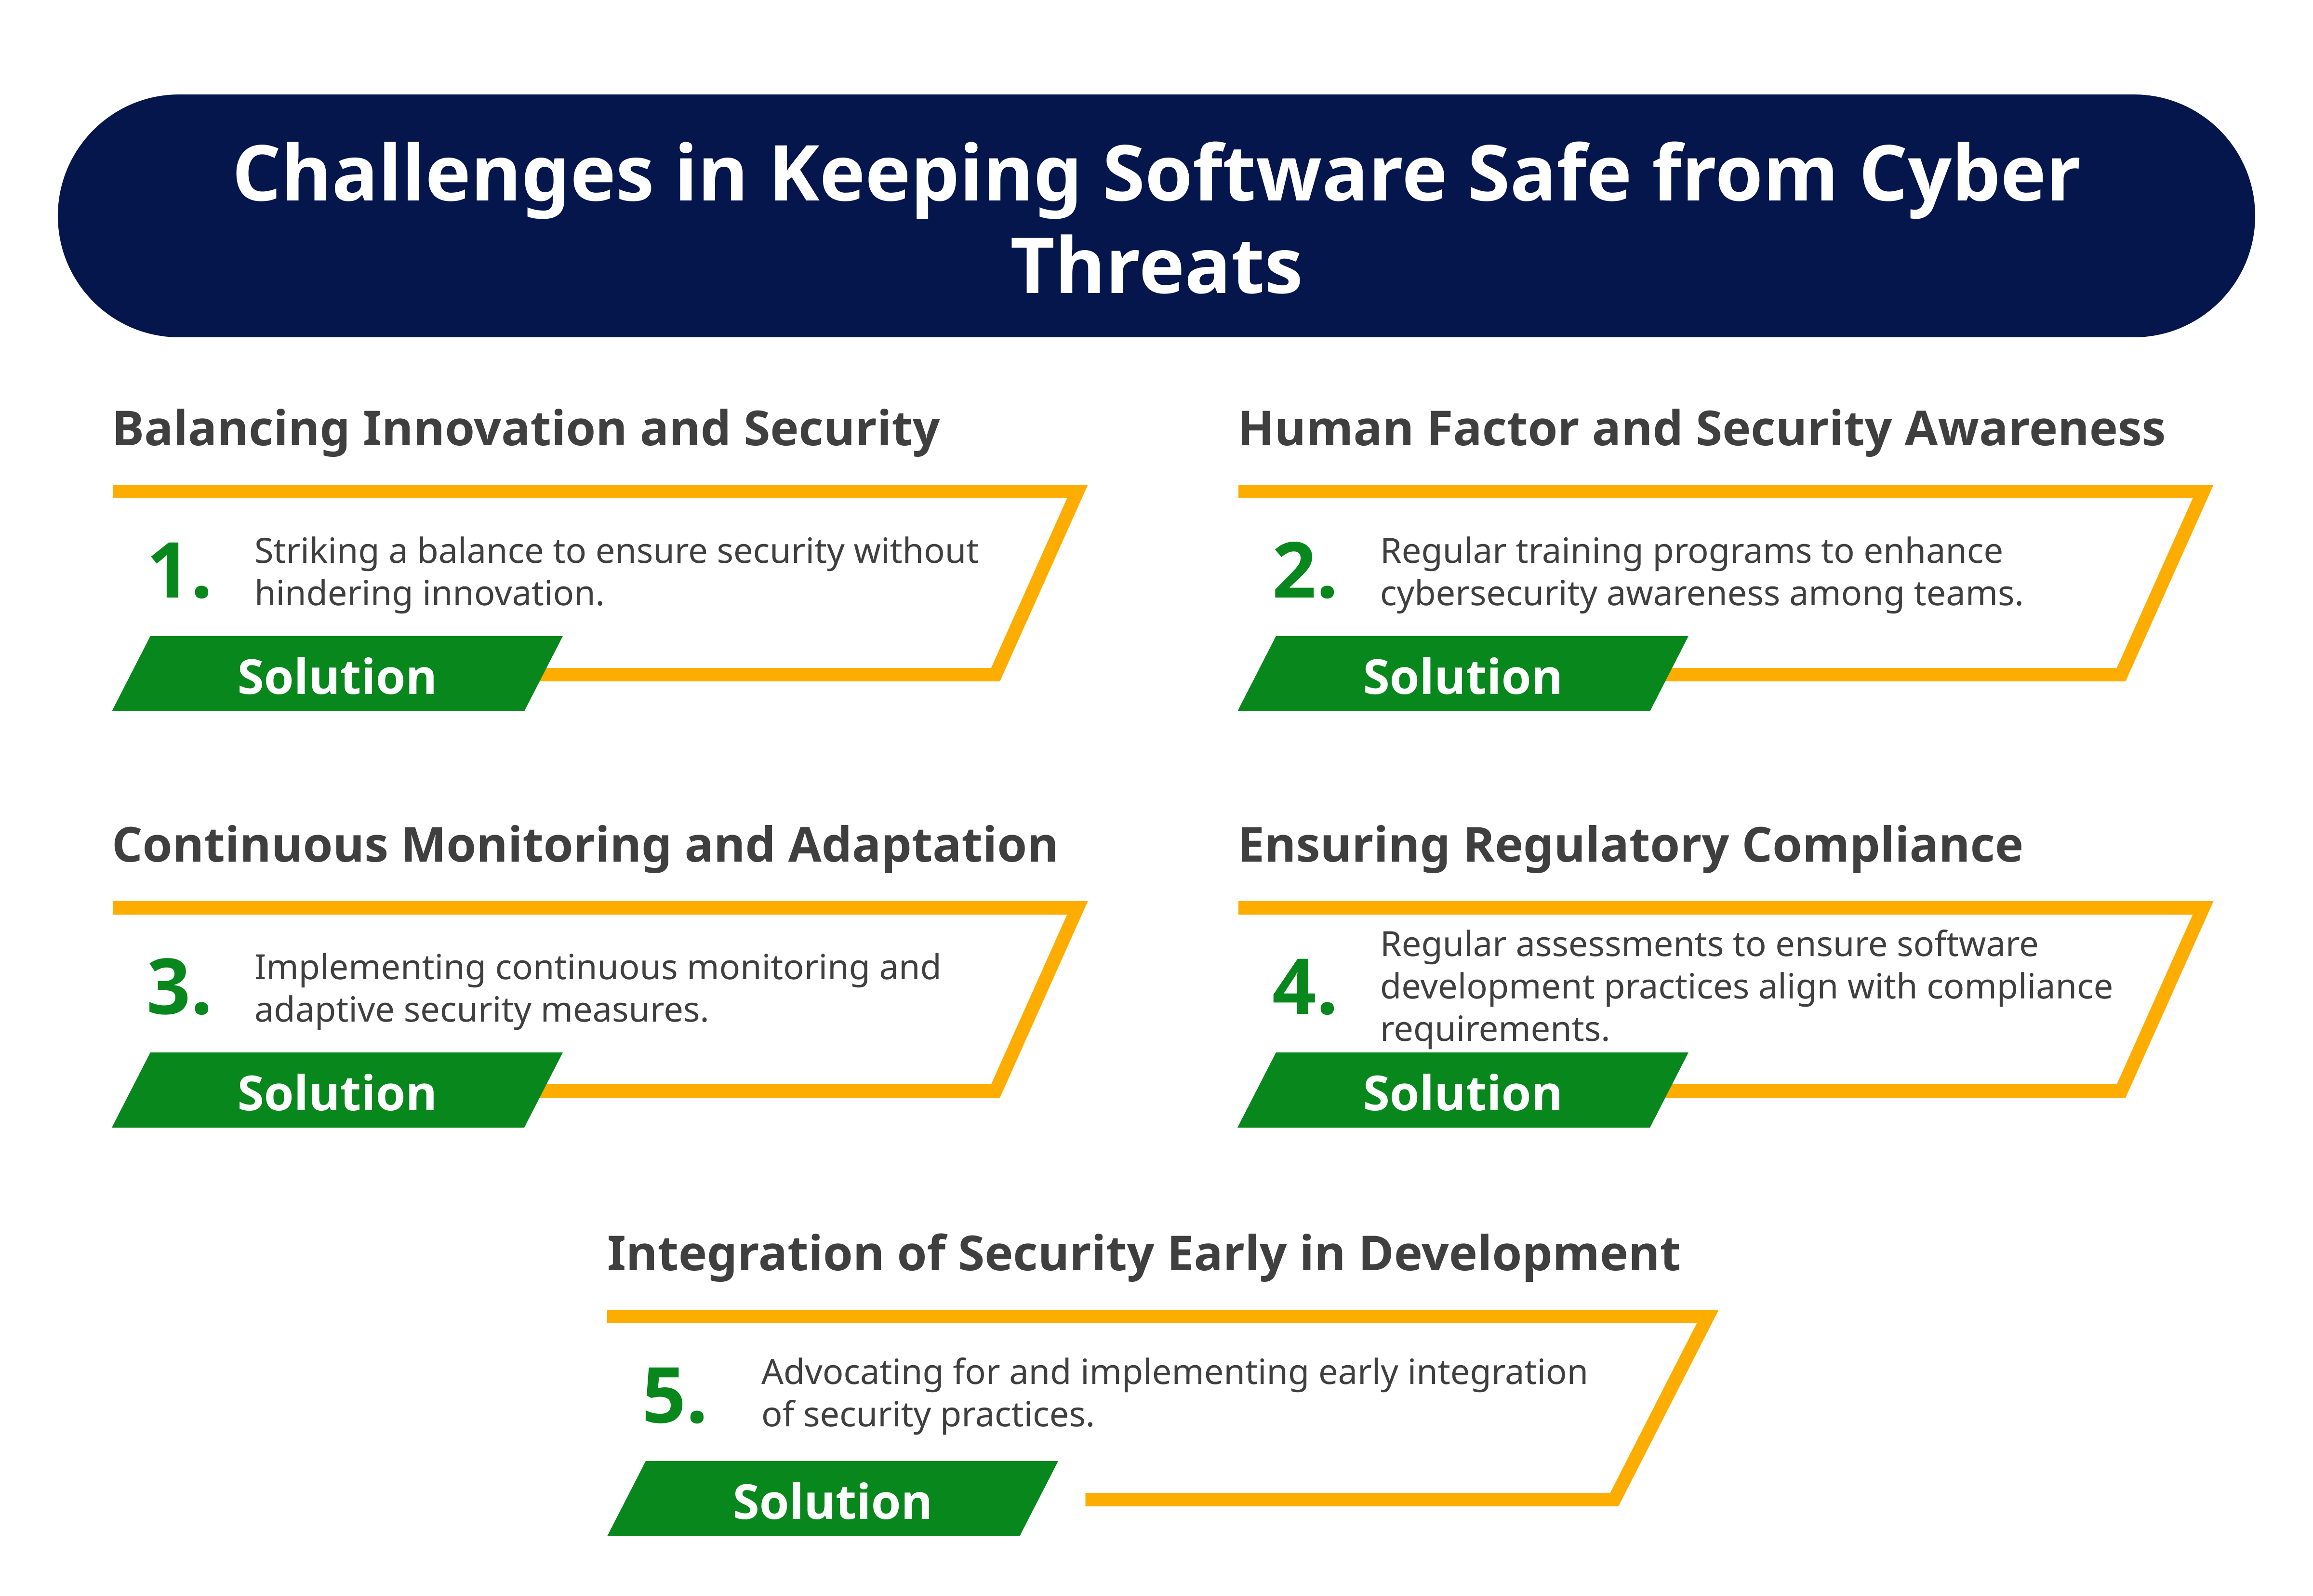 Challenges in Keeping Software Safe from Cyber Threats